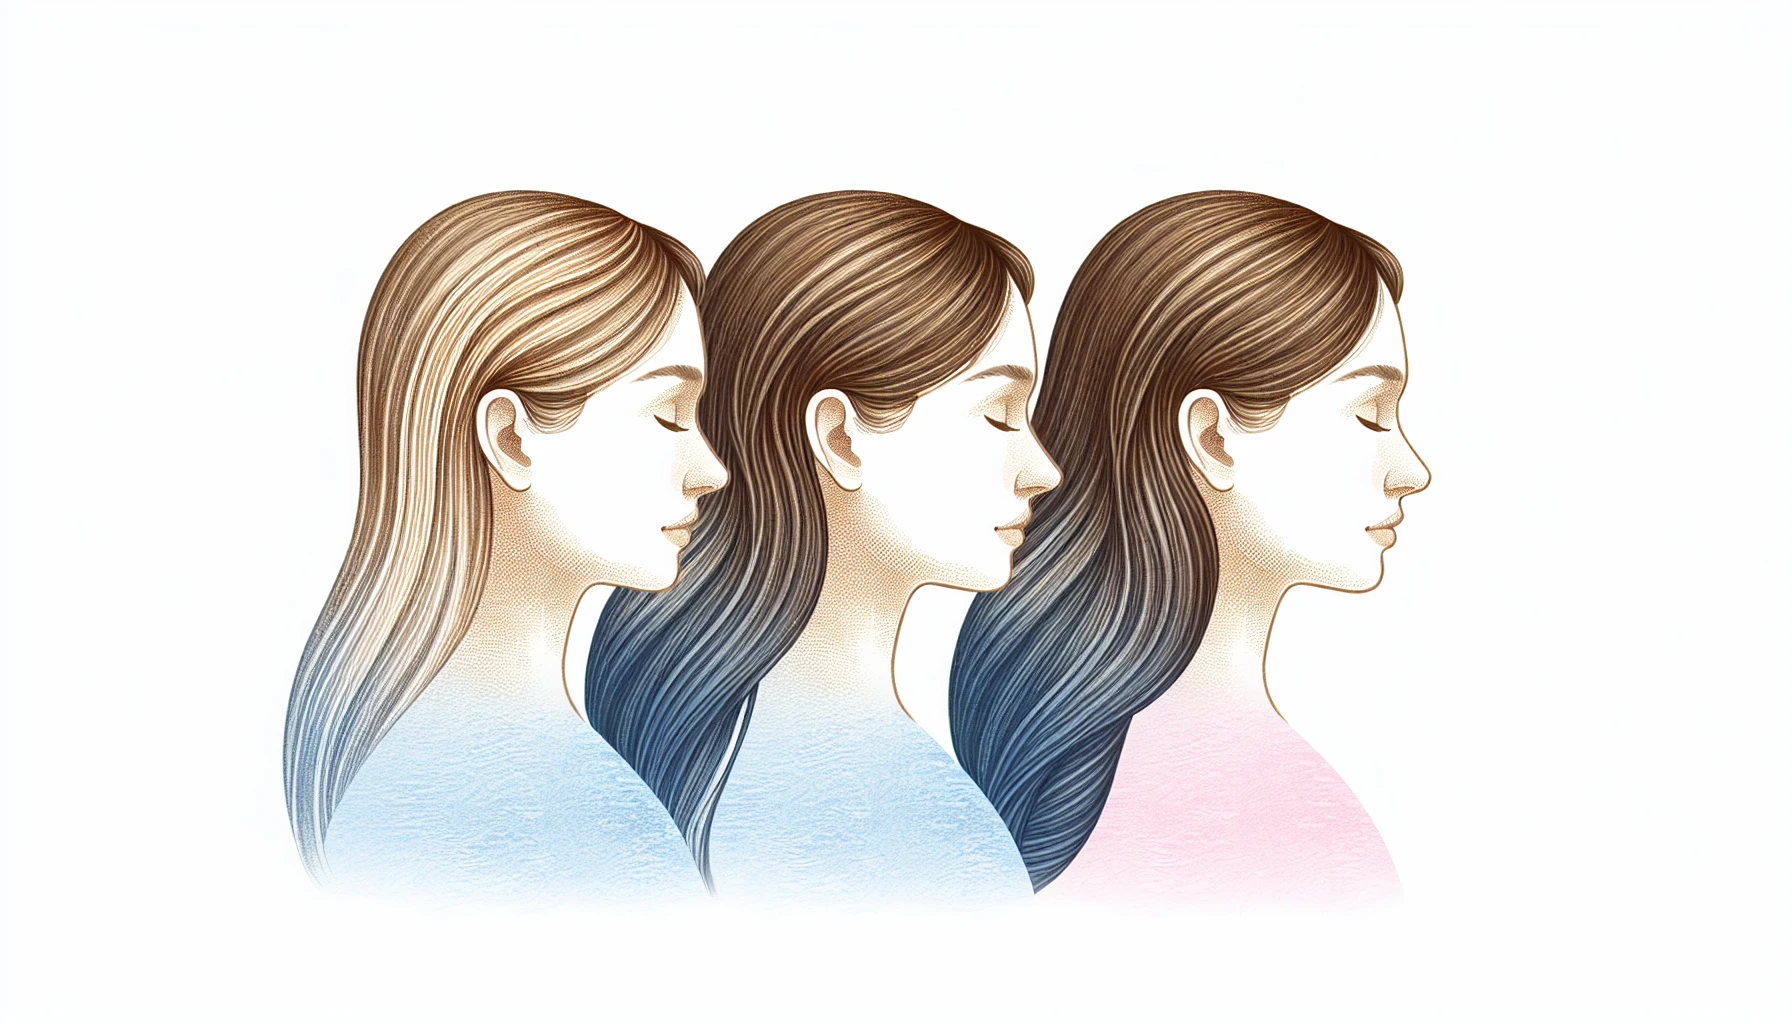 Illustration of hair growth cycle during postpartum period